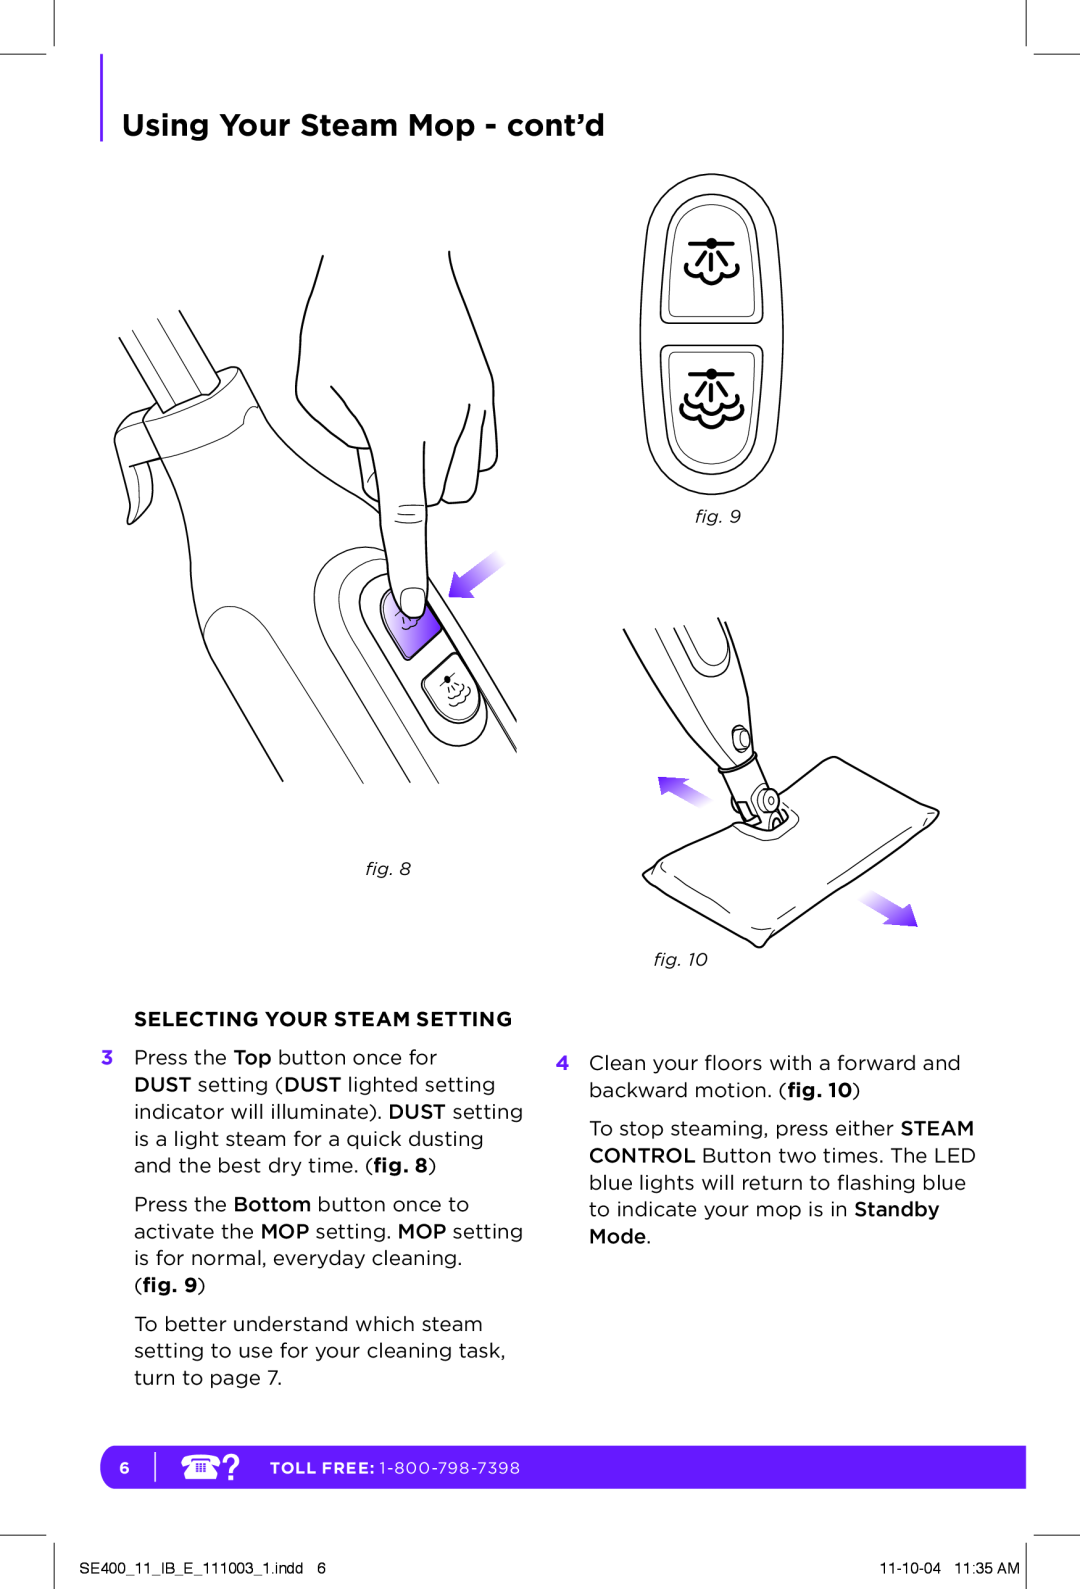 Shark SE400 manual Using Your Steam Mop - cont’d, Selecting Your Steam Setting 